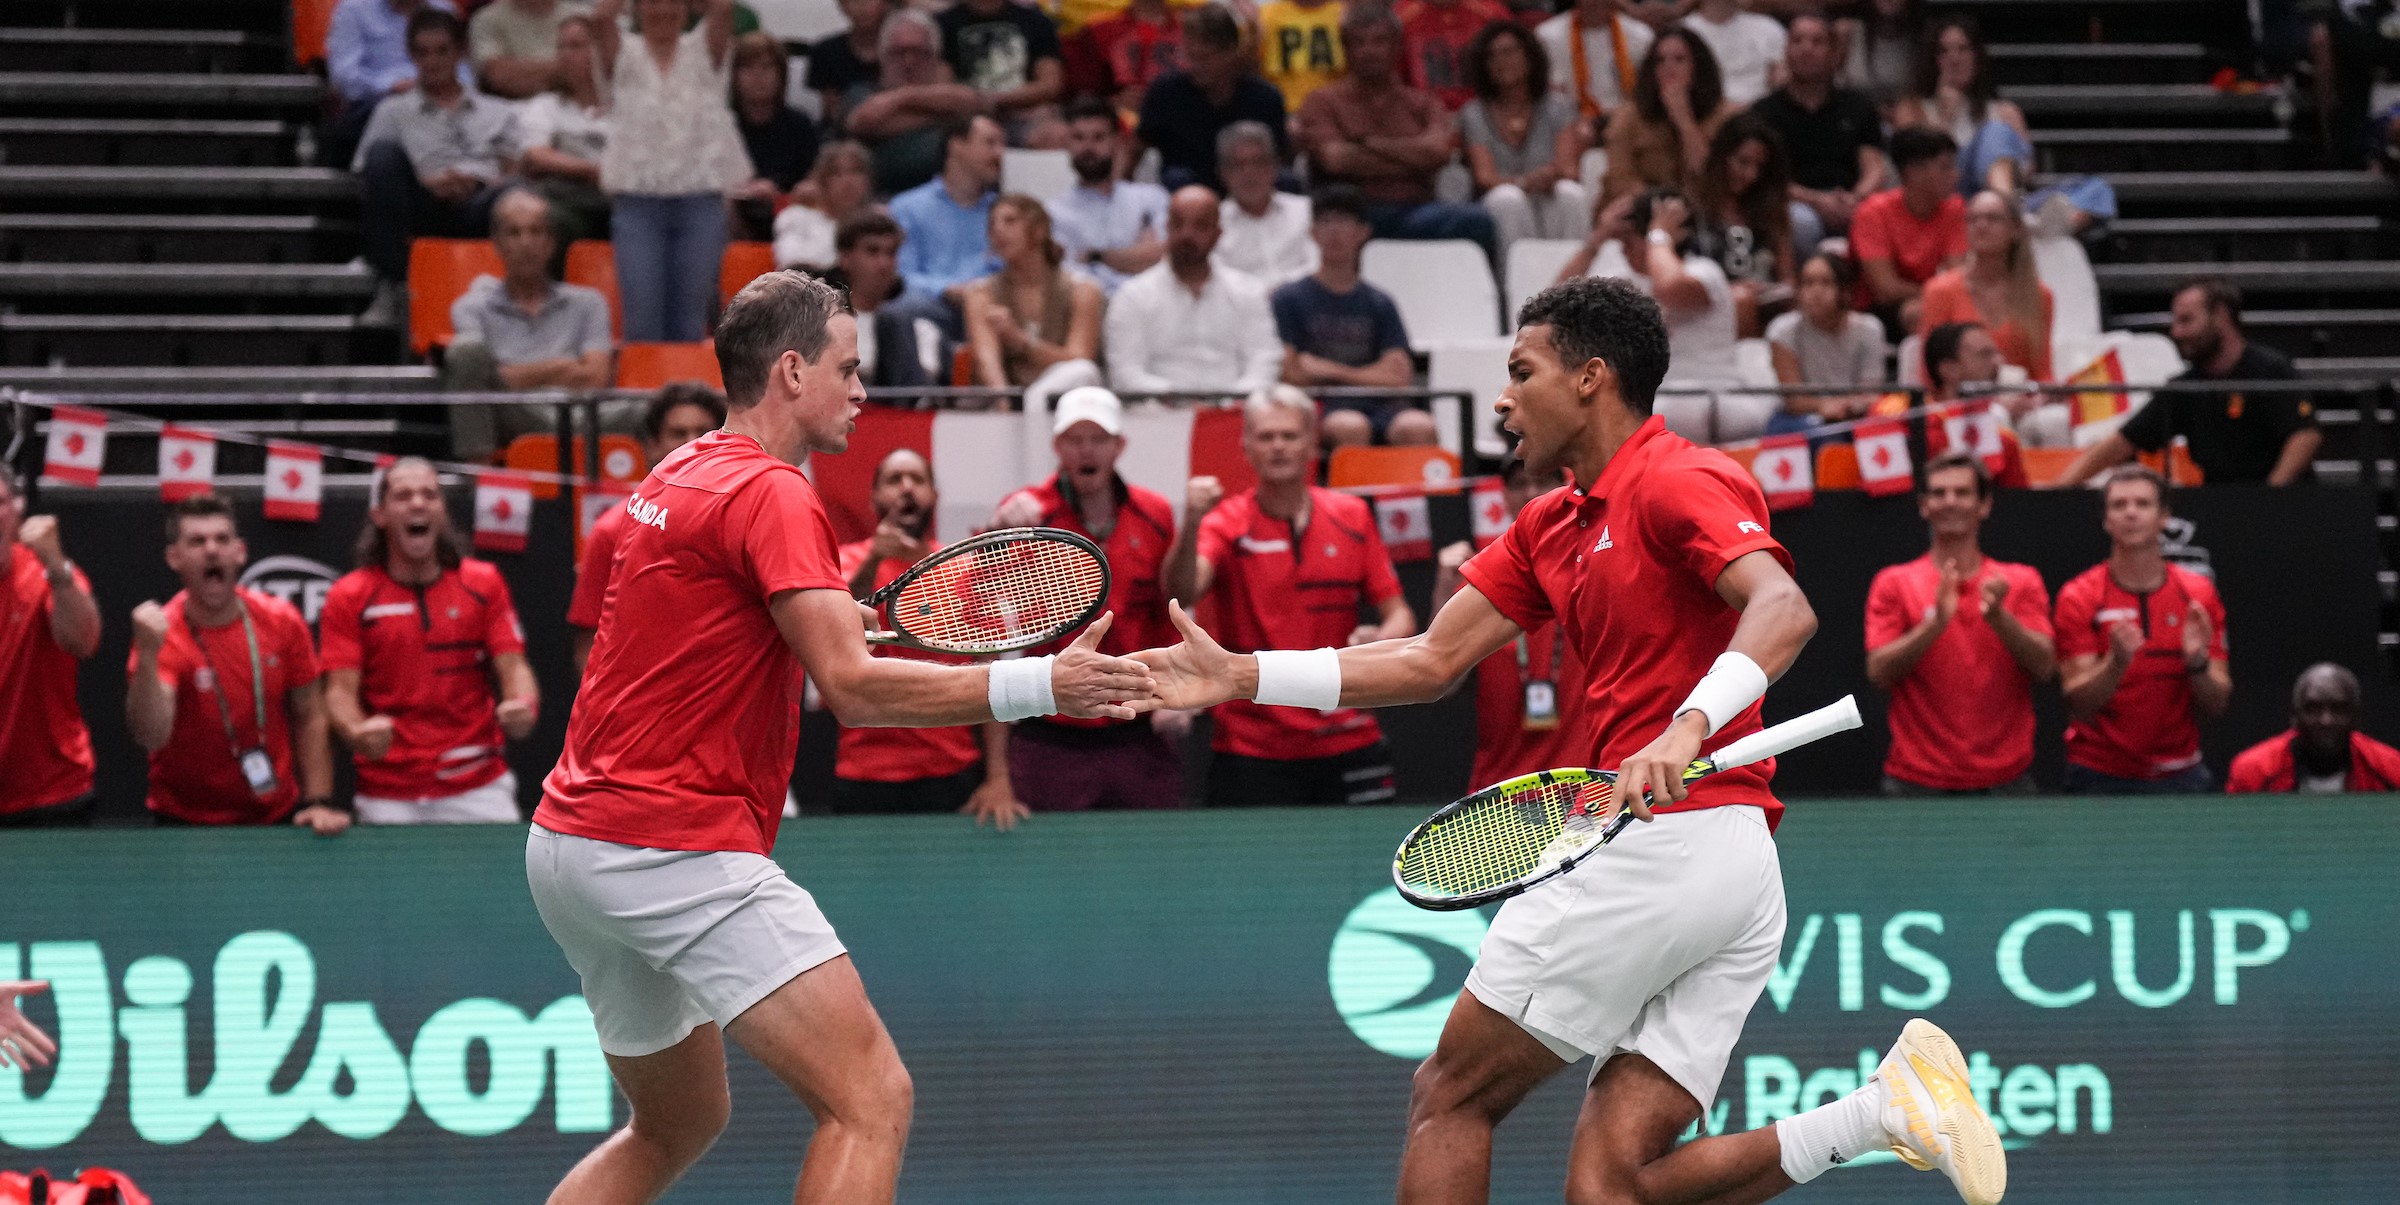 Vasek Pospisil (left) high fives Felix Auger-Aliassime in front of the Team Canada bench.